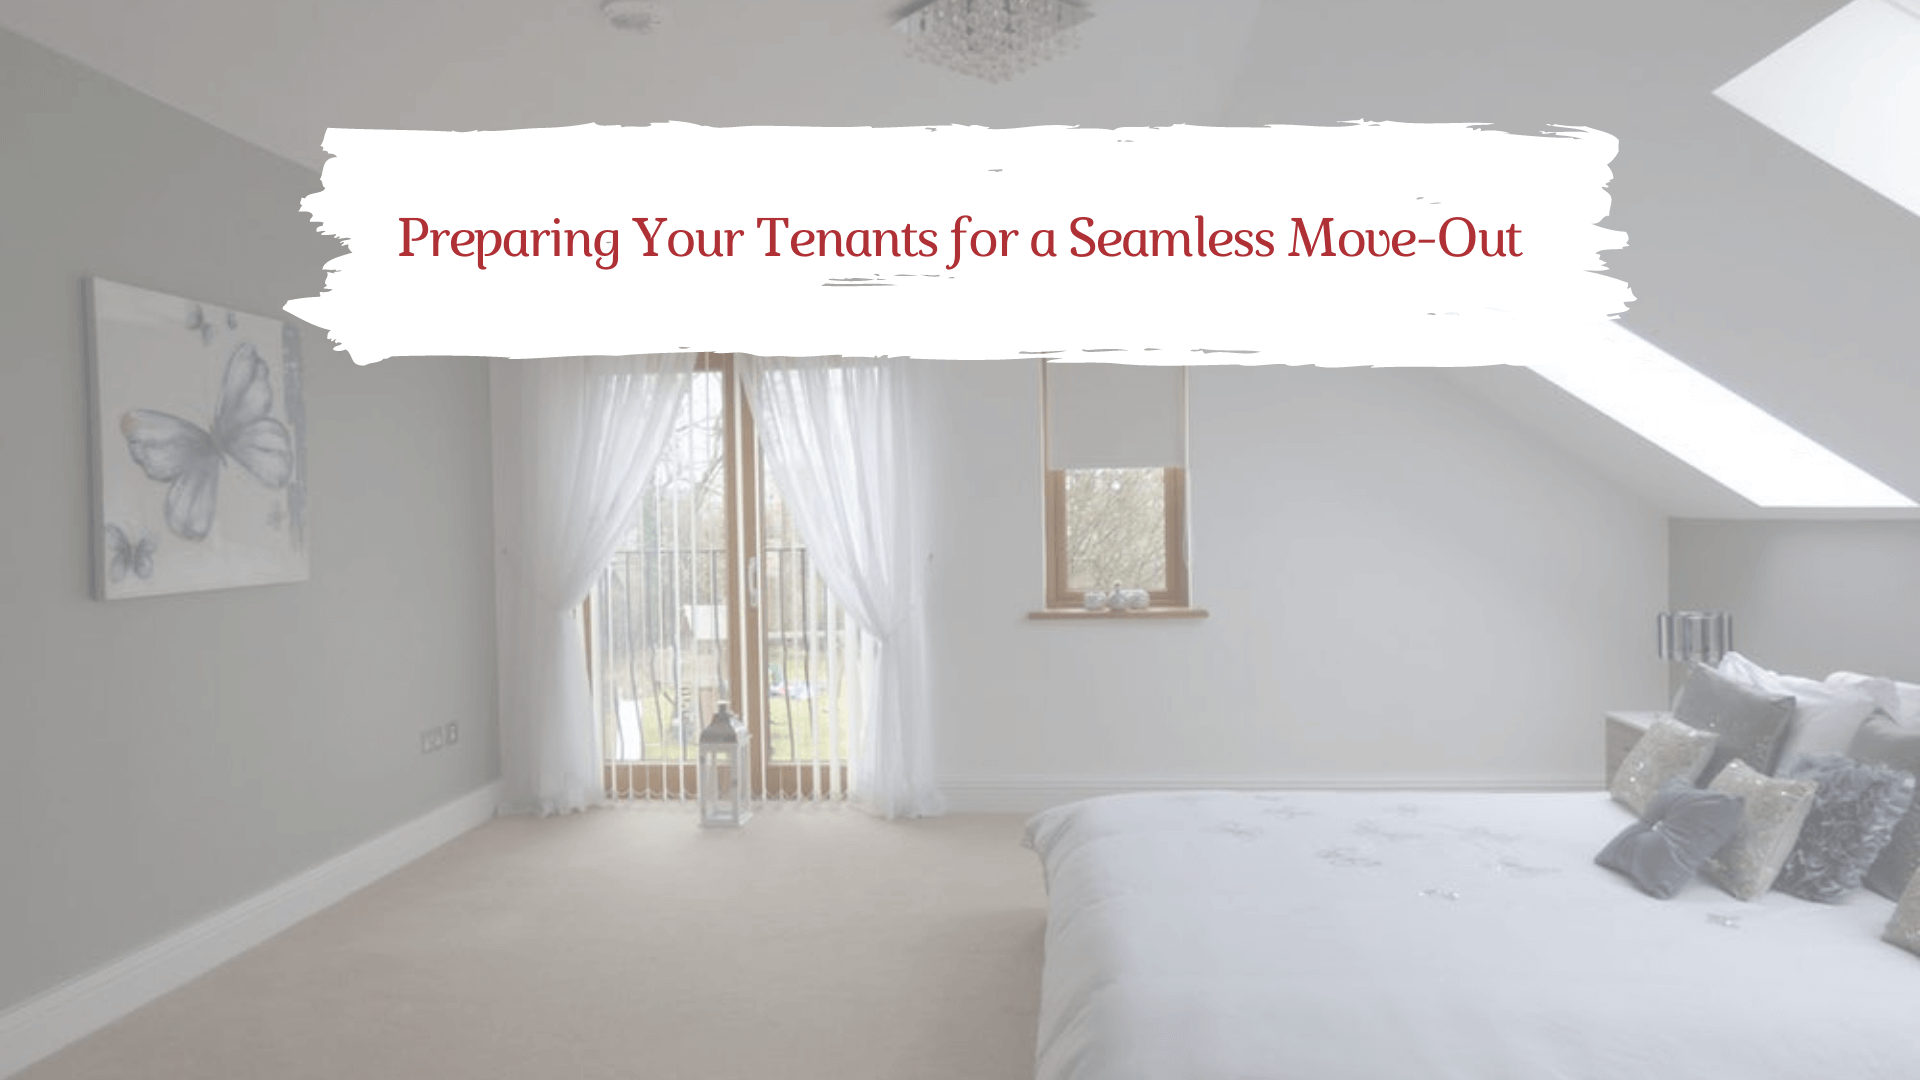 Preparing Your Tenants for a Seamless Move-Out - article banner